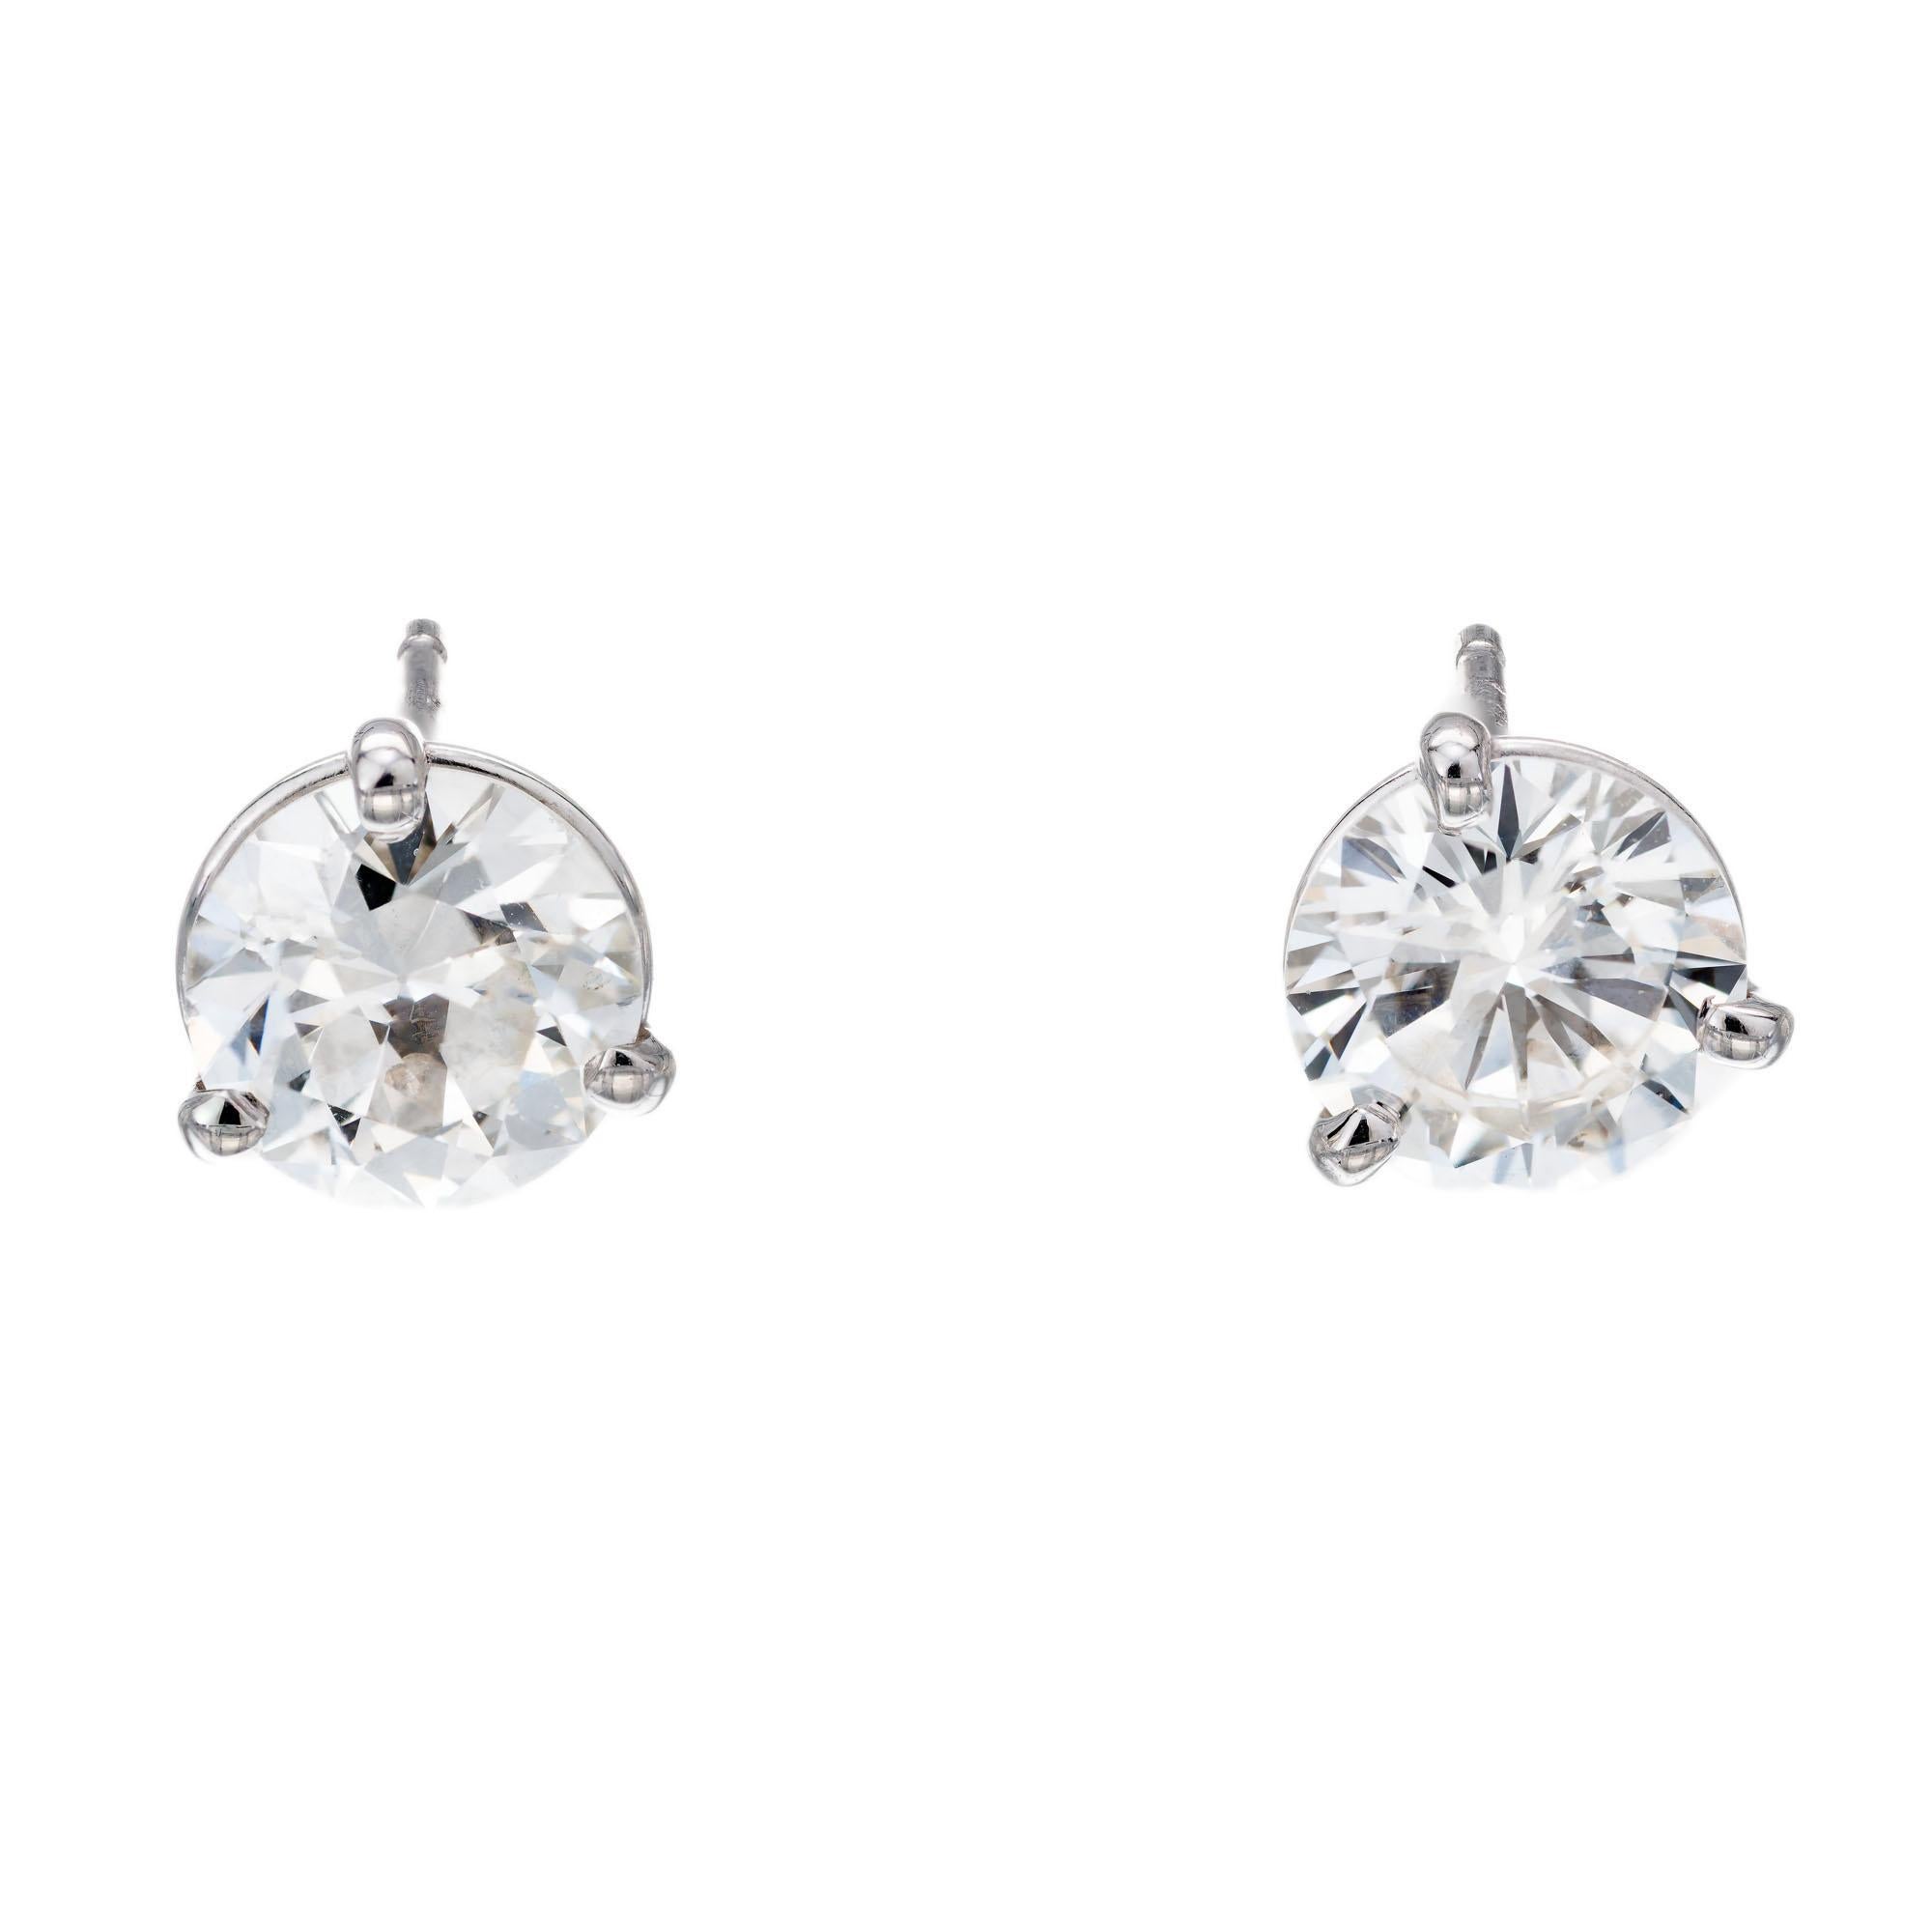 Round diamond stud earrings in two three-prong platinum basket settings. CIA certified. 

1 round diamond, approx total weight: .98cts I, SI1 GIA Certified.  GIA certified# 5172585703
1 round diamond, approx total weight: .96cts H, VS1, GIA